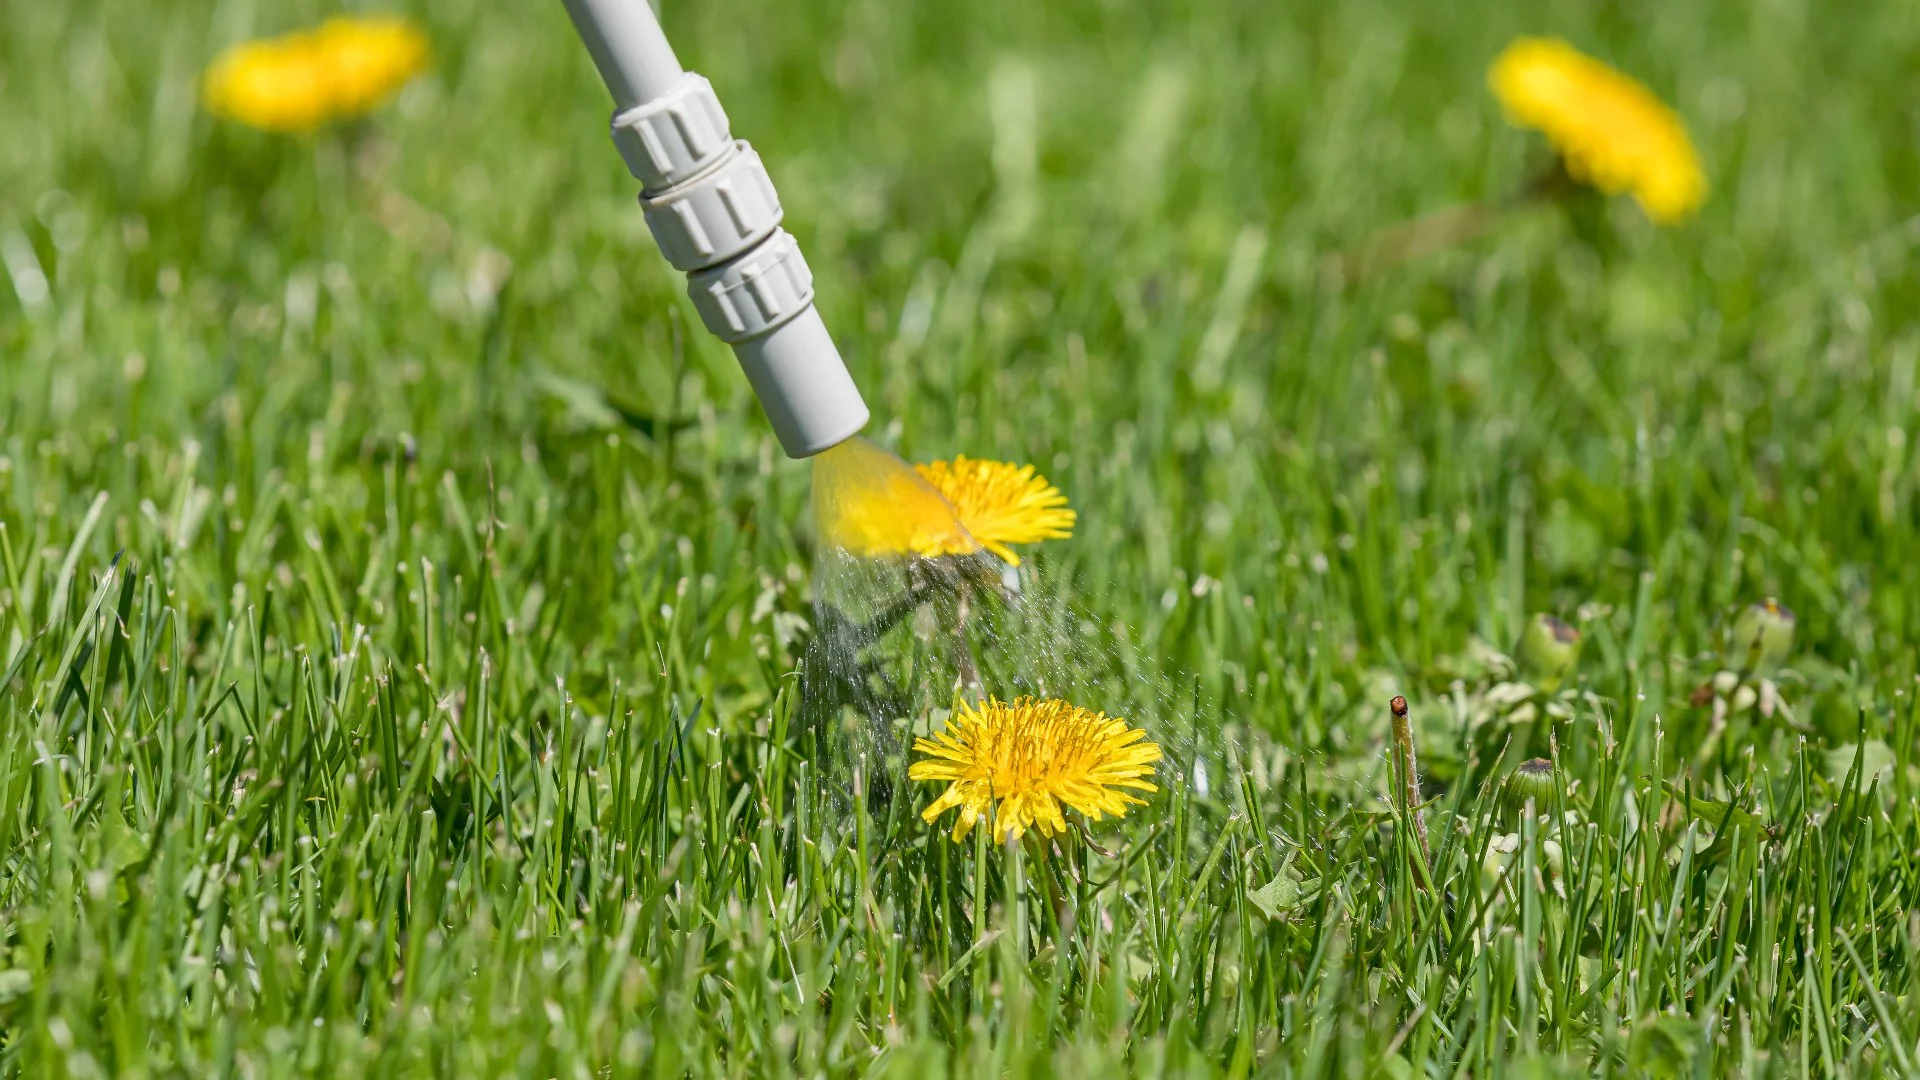 Why You Should Use Both Pre-Emergent & Post-Emergent Weed Control for Your Lawn